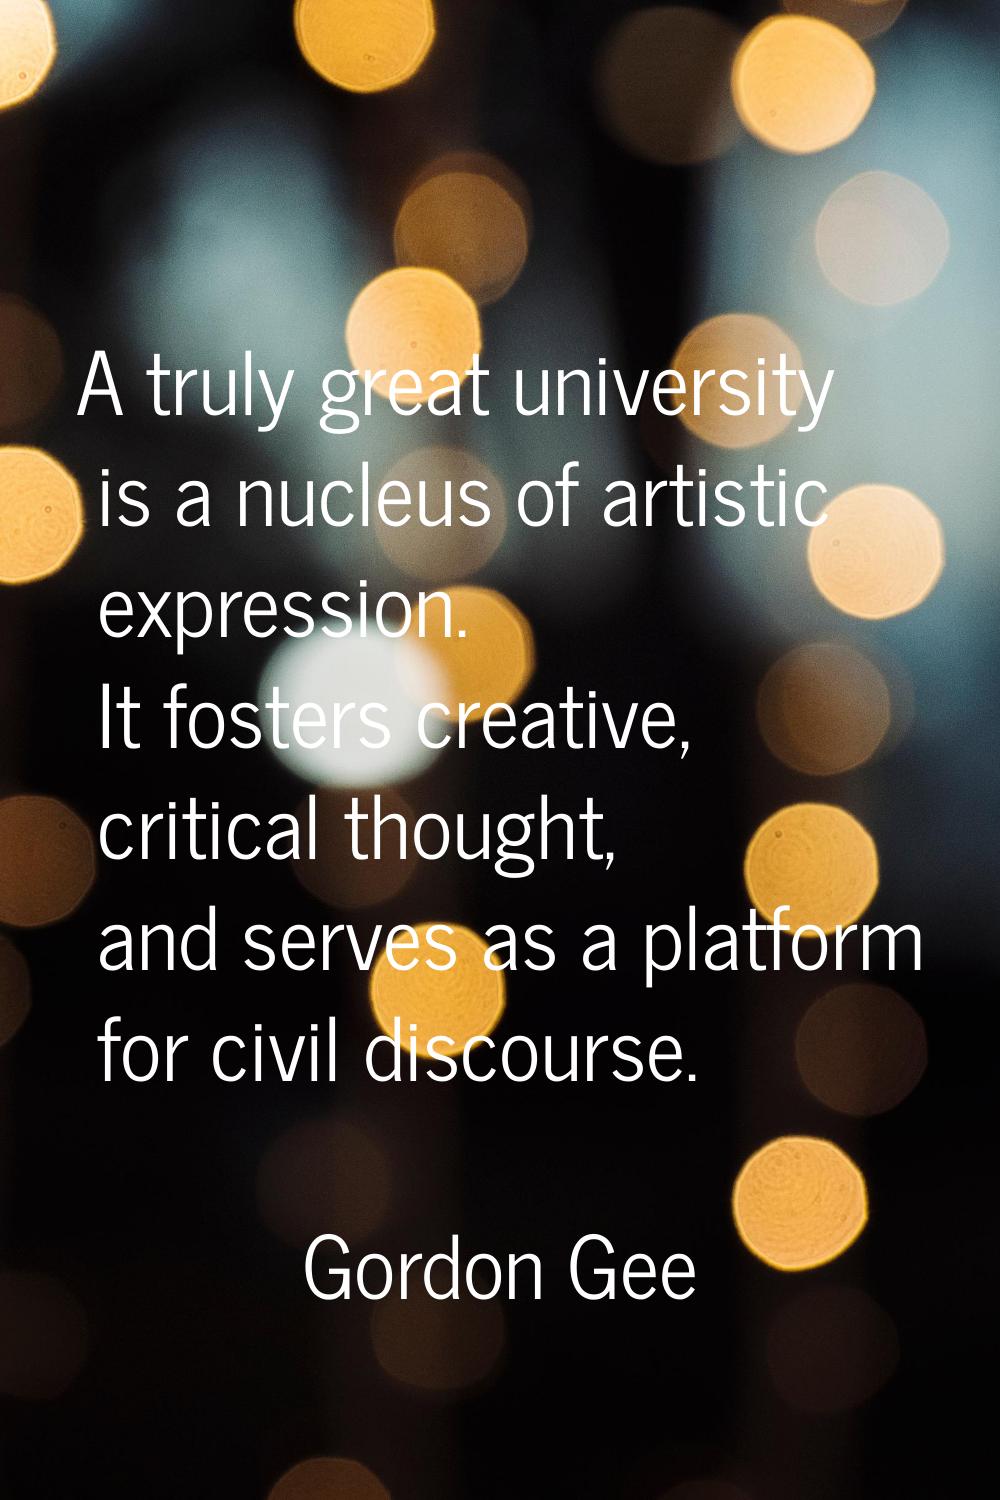 A truly great university is a nucleus of artistic expression. It fosters creative, critical thought